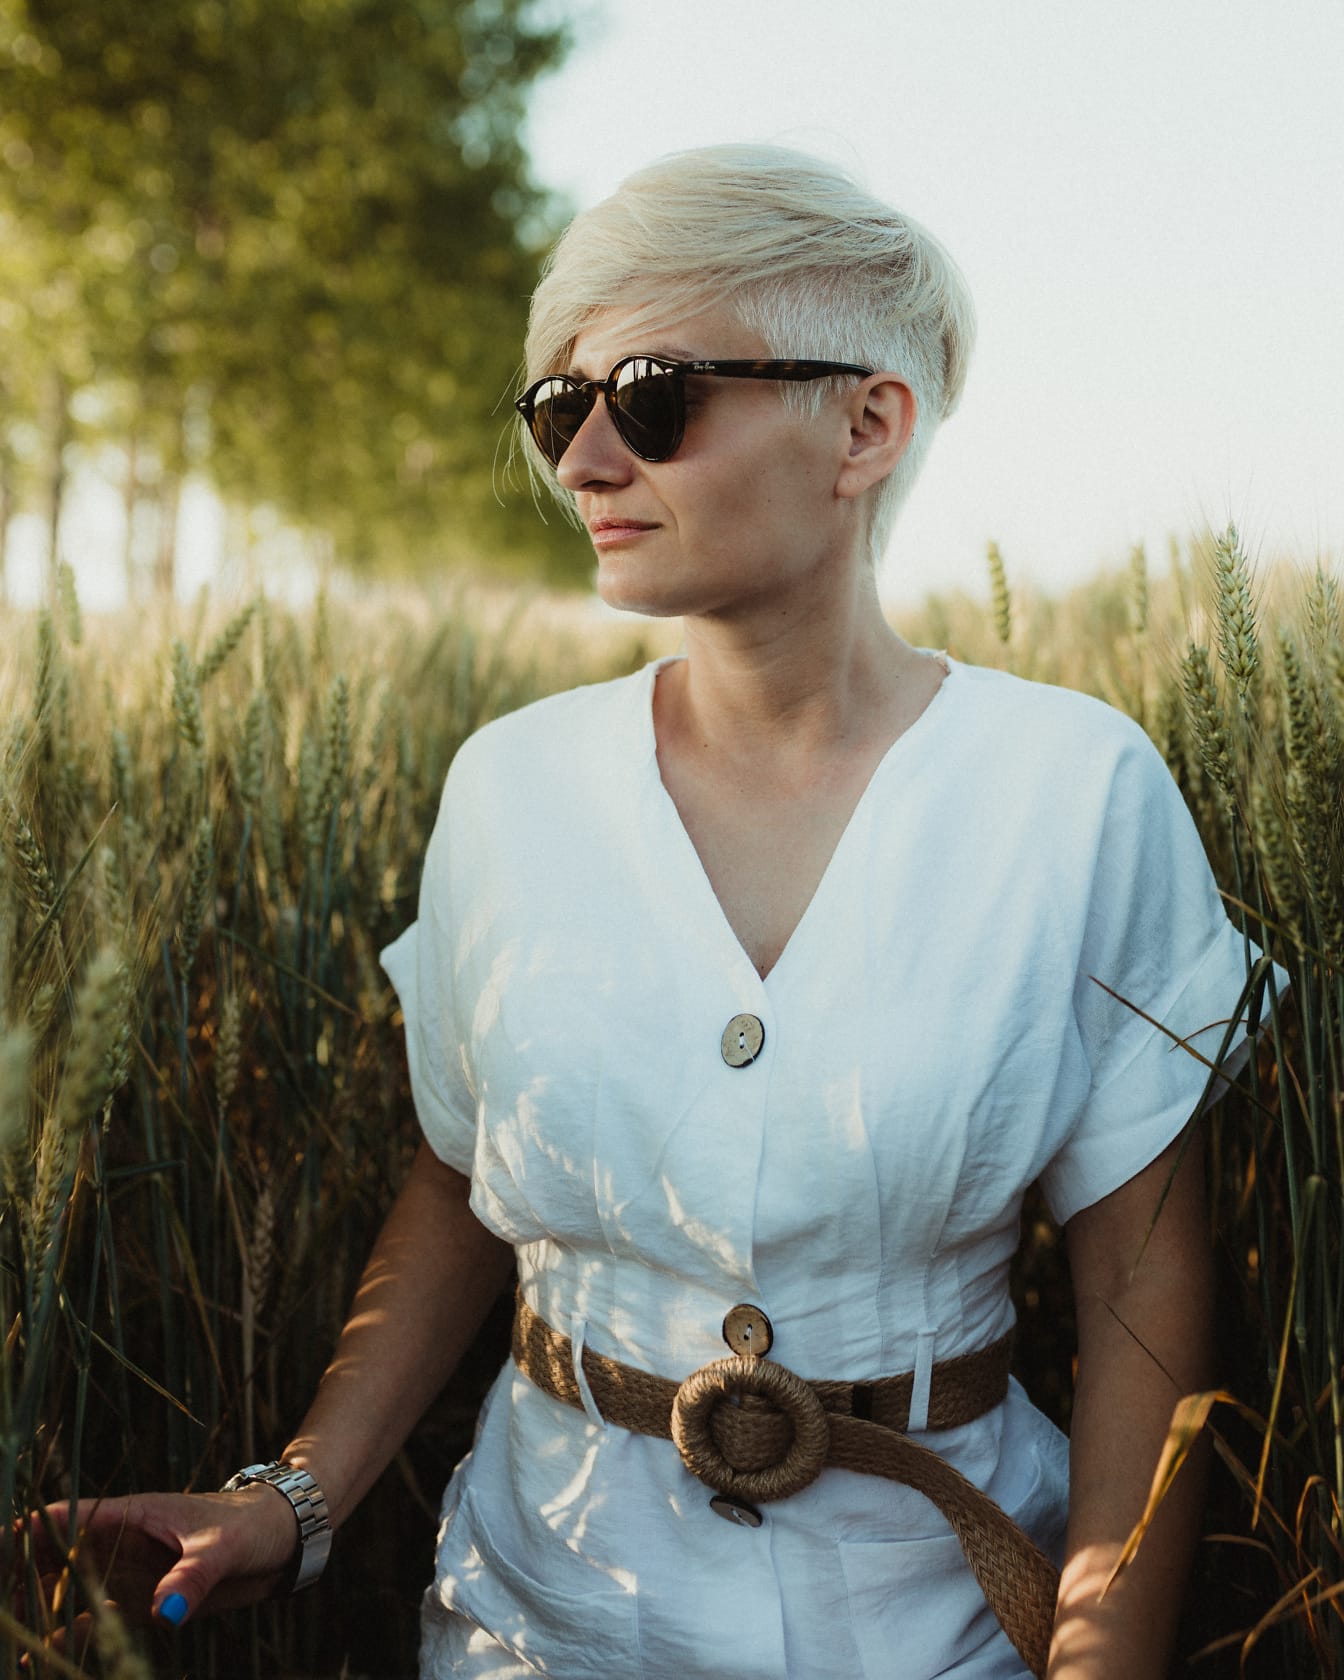 Blonde with short hair and sunglasses posing in wheat field